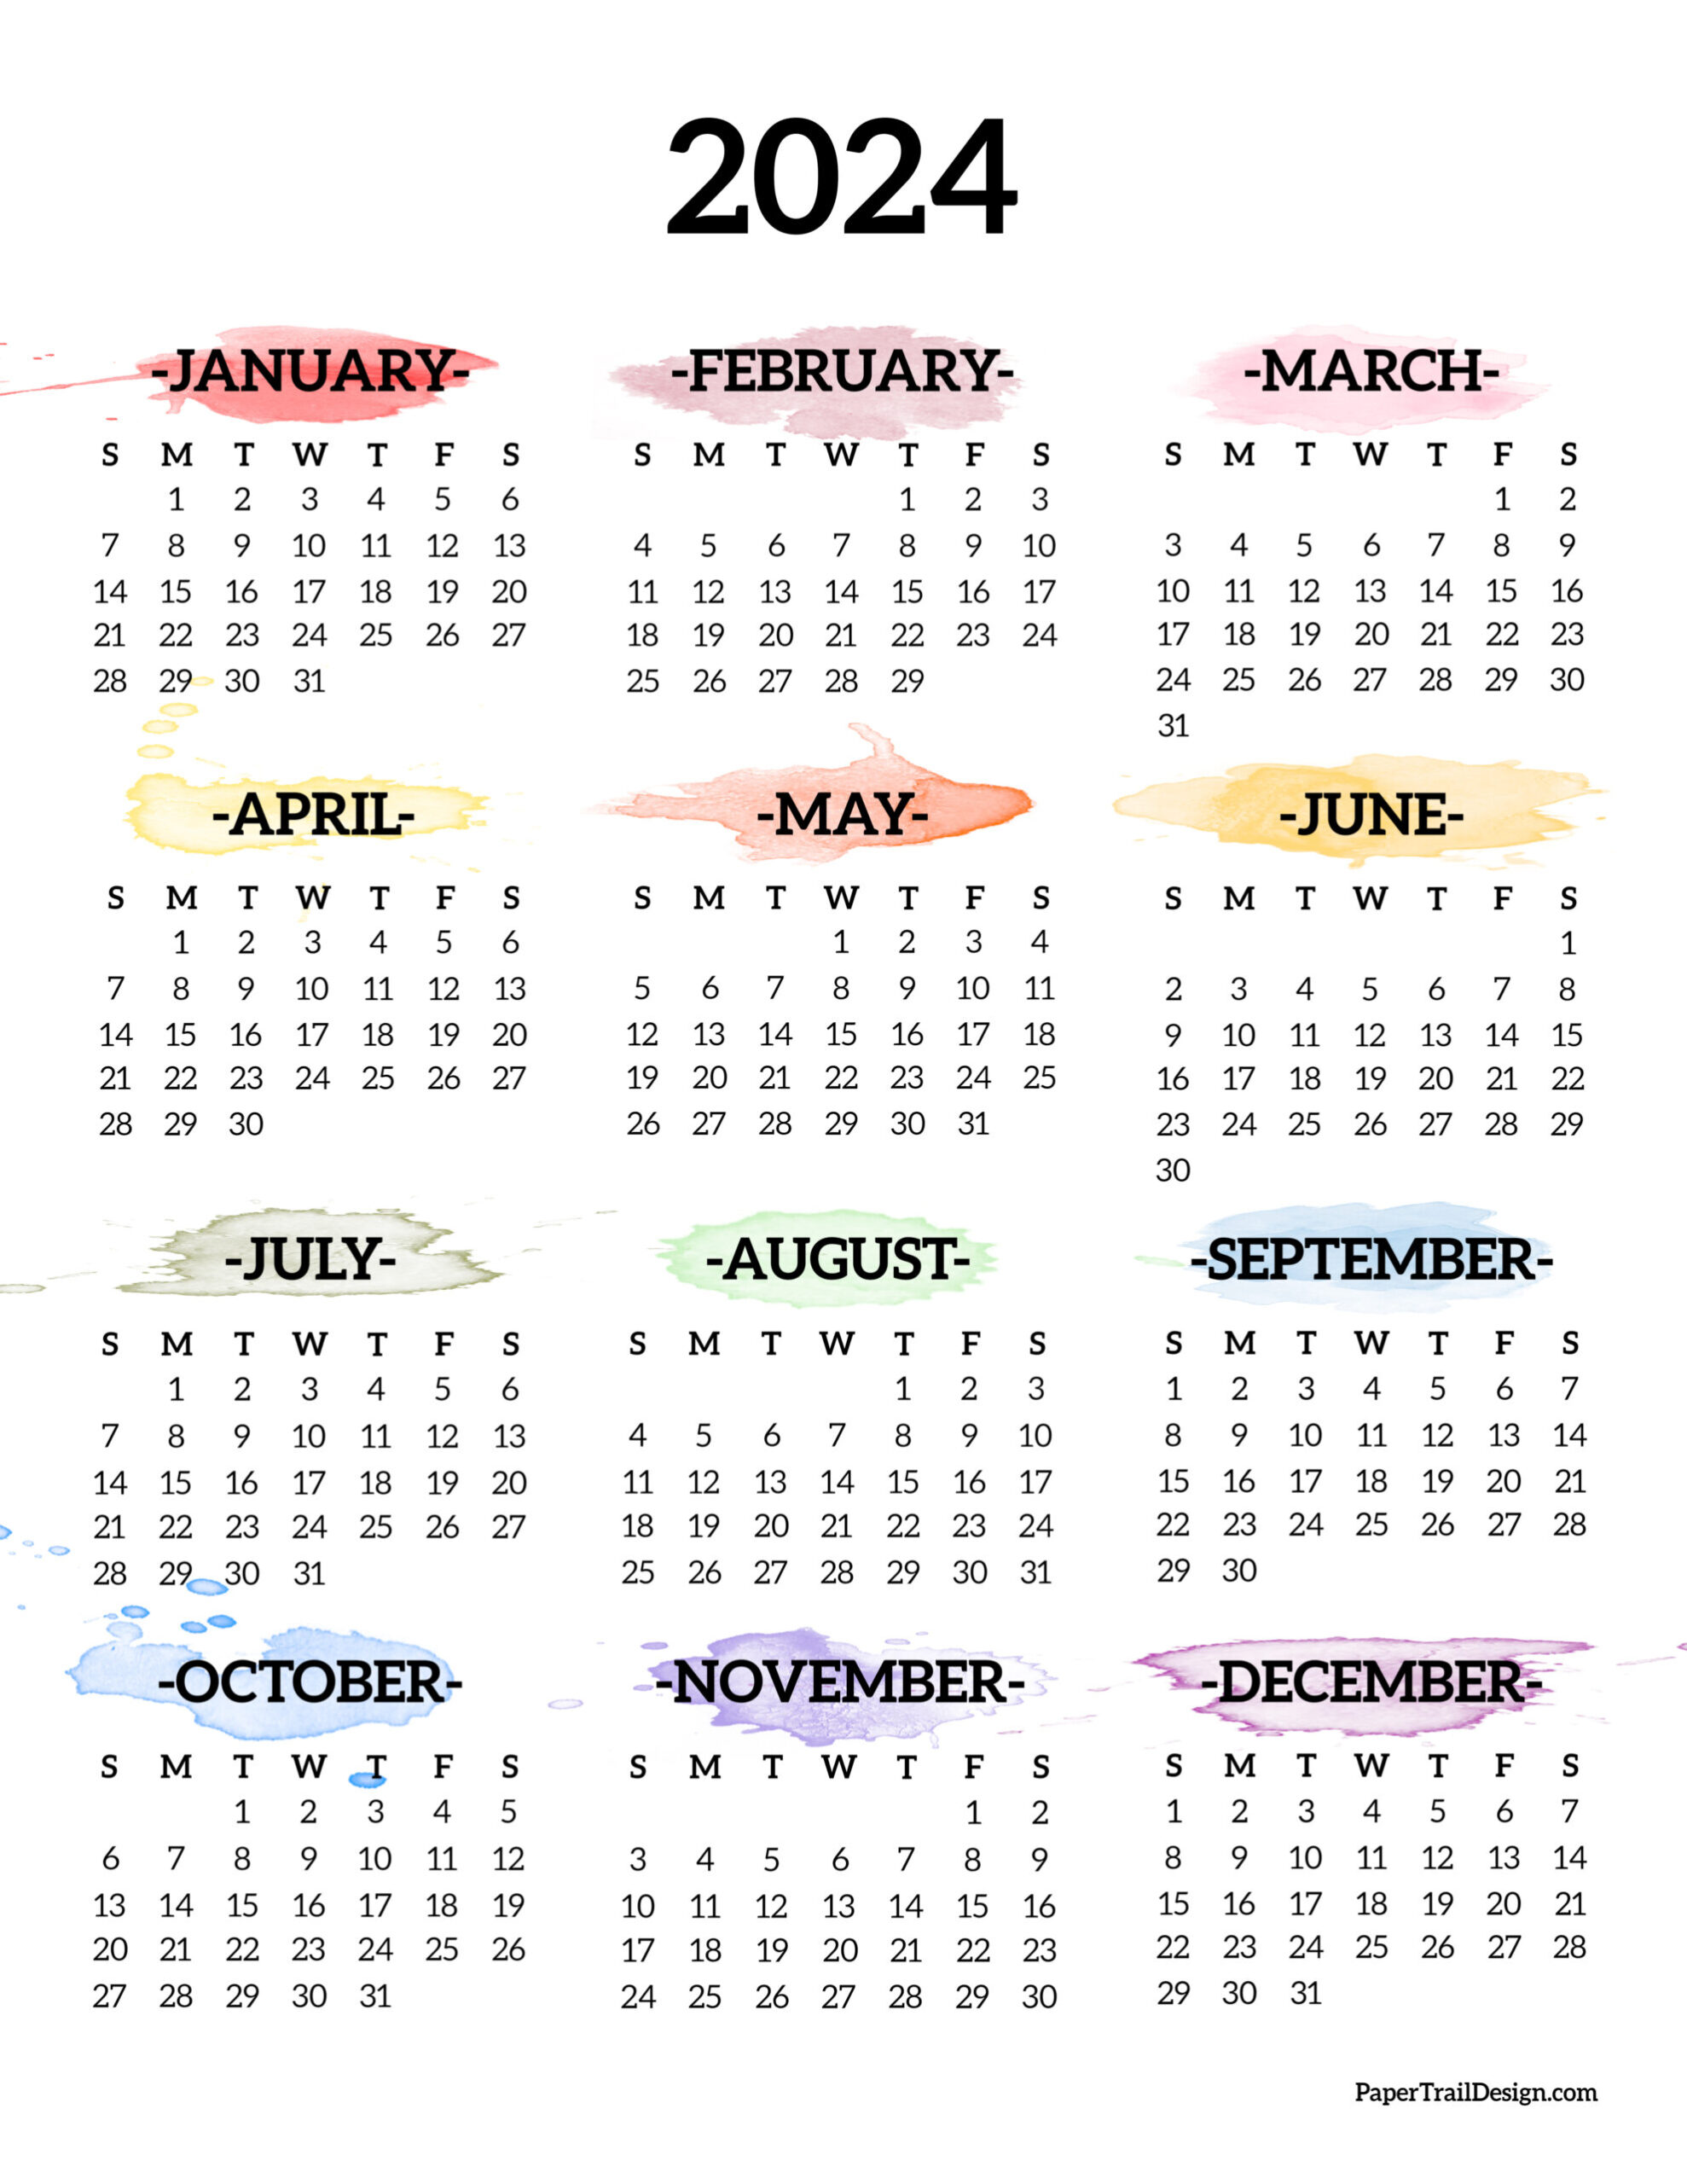 Calendar 2024 Printable One Page - Paper Trail Design for Free Printable 1 Page 2024 Calendar